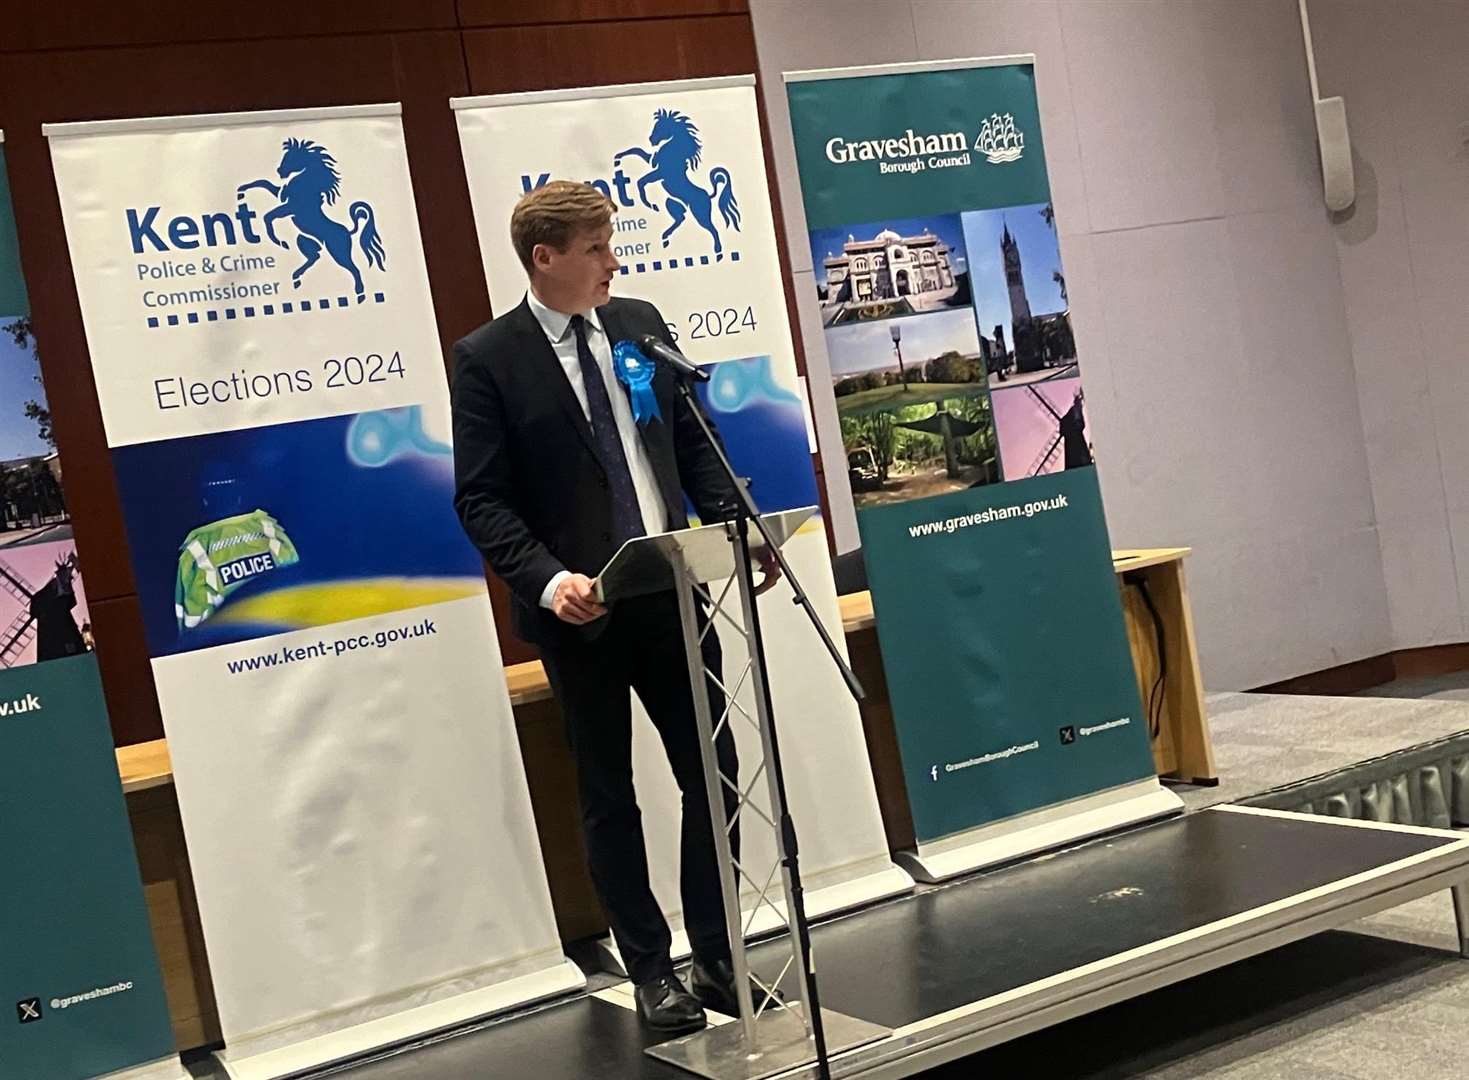 Matthew Scott gives his address after winning the Kent Police and Crime Commissioner election 2024